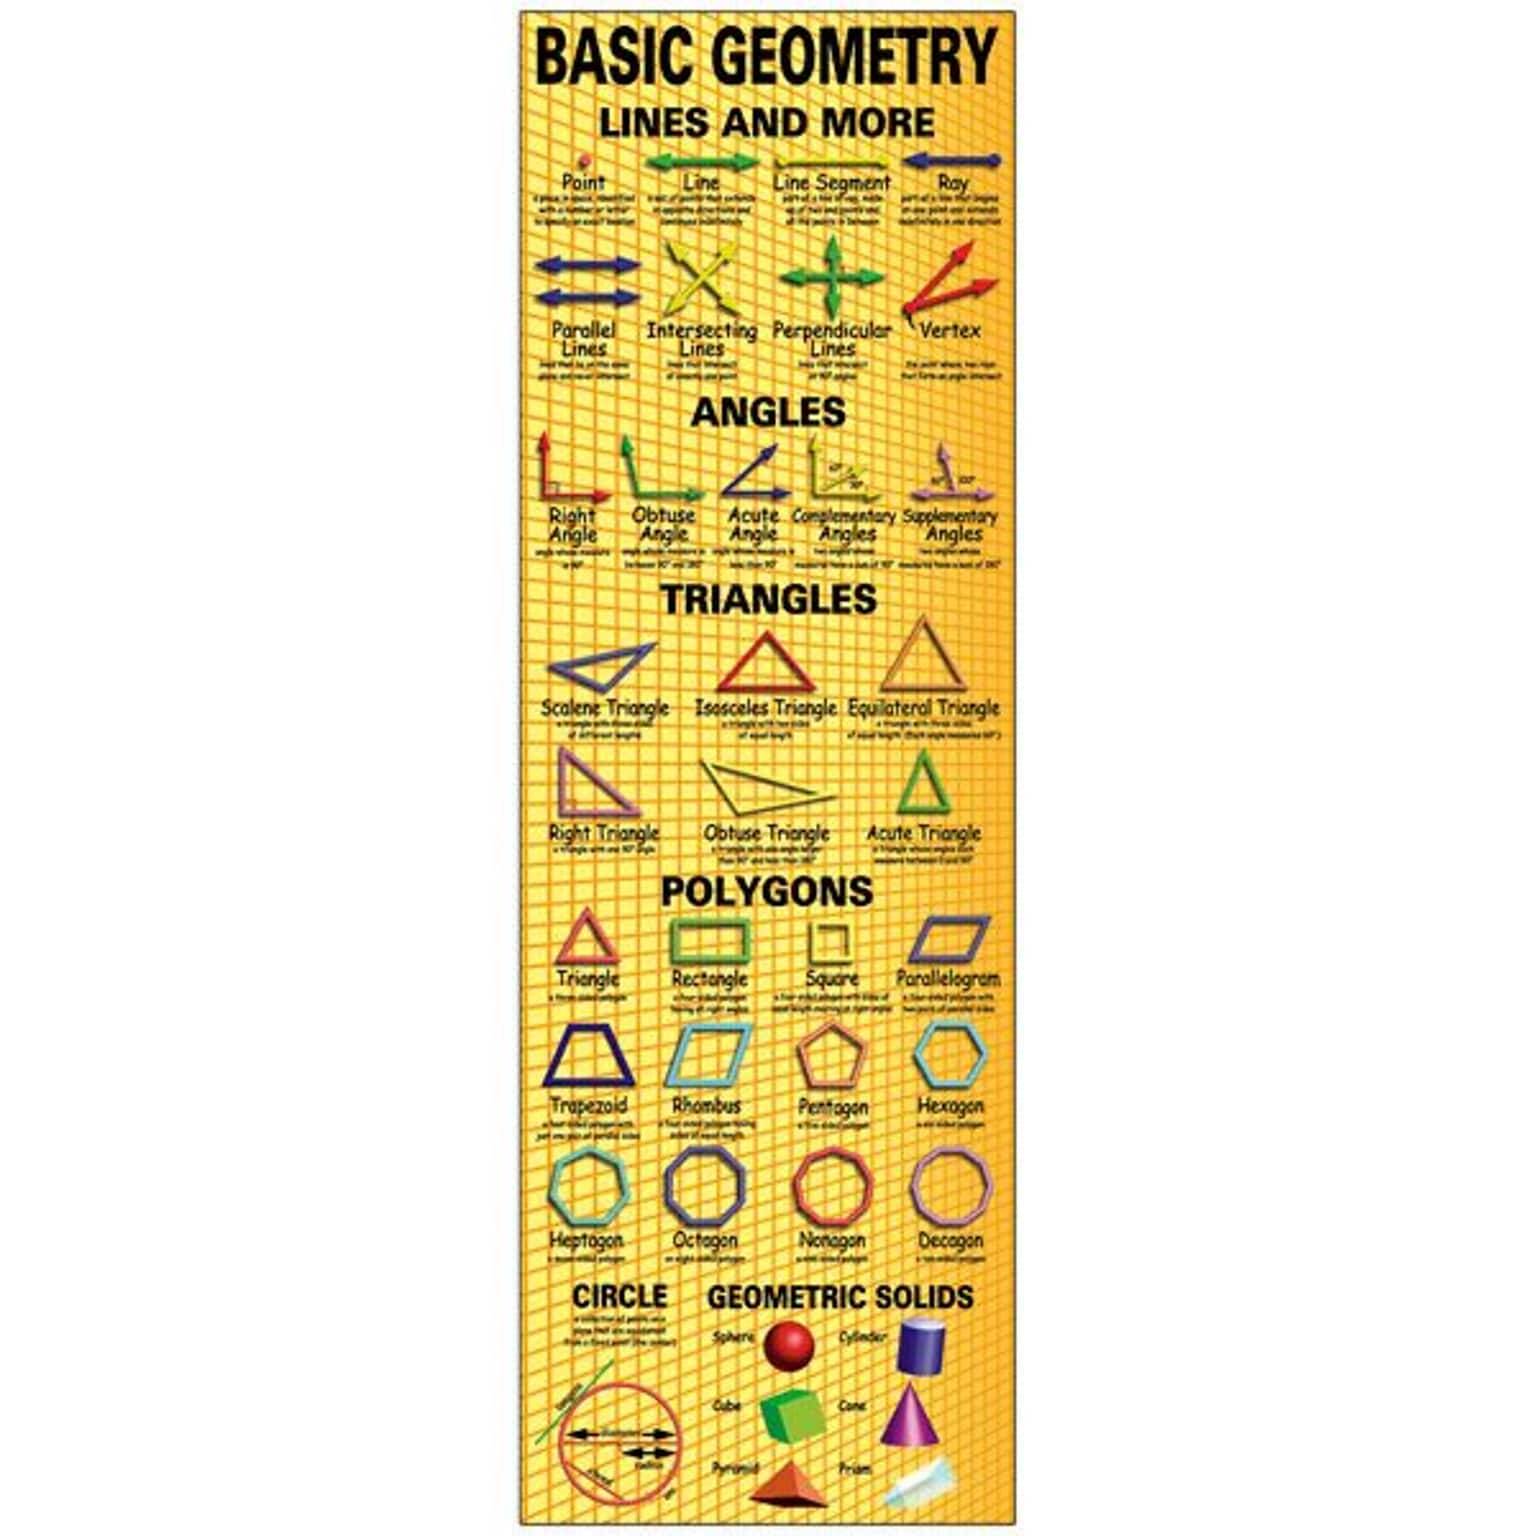 Basic Geometry Colossal Concept Poster